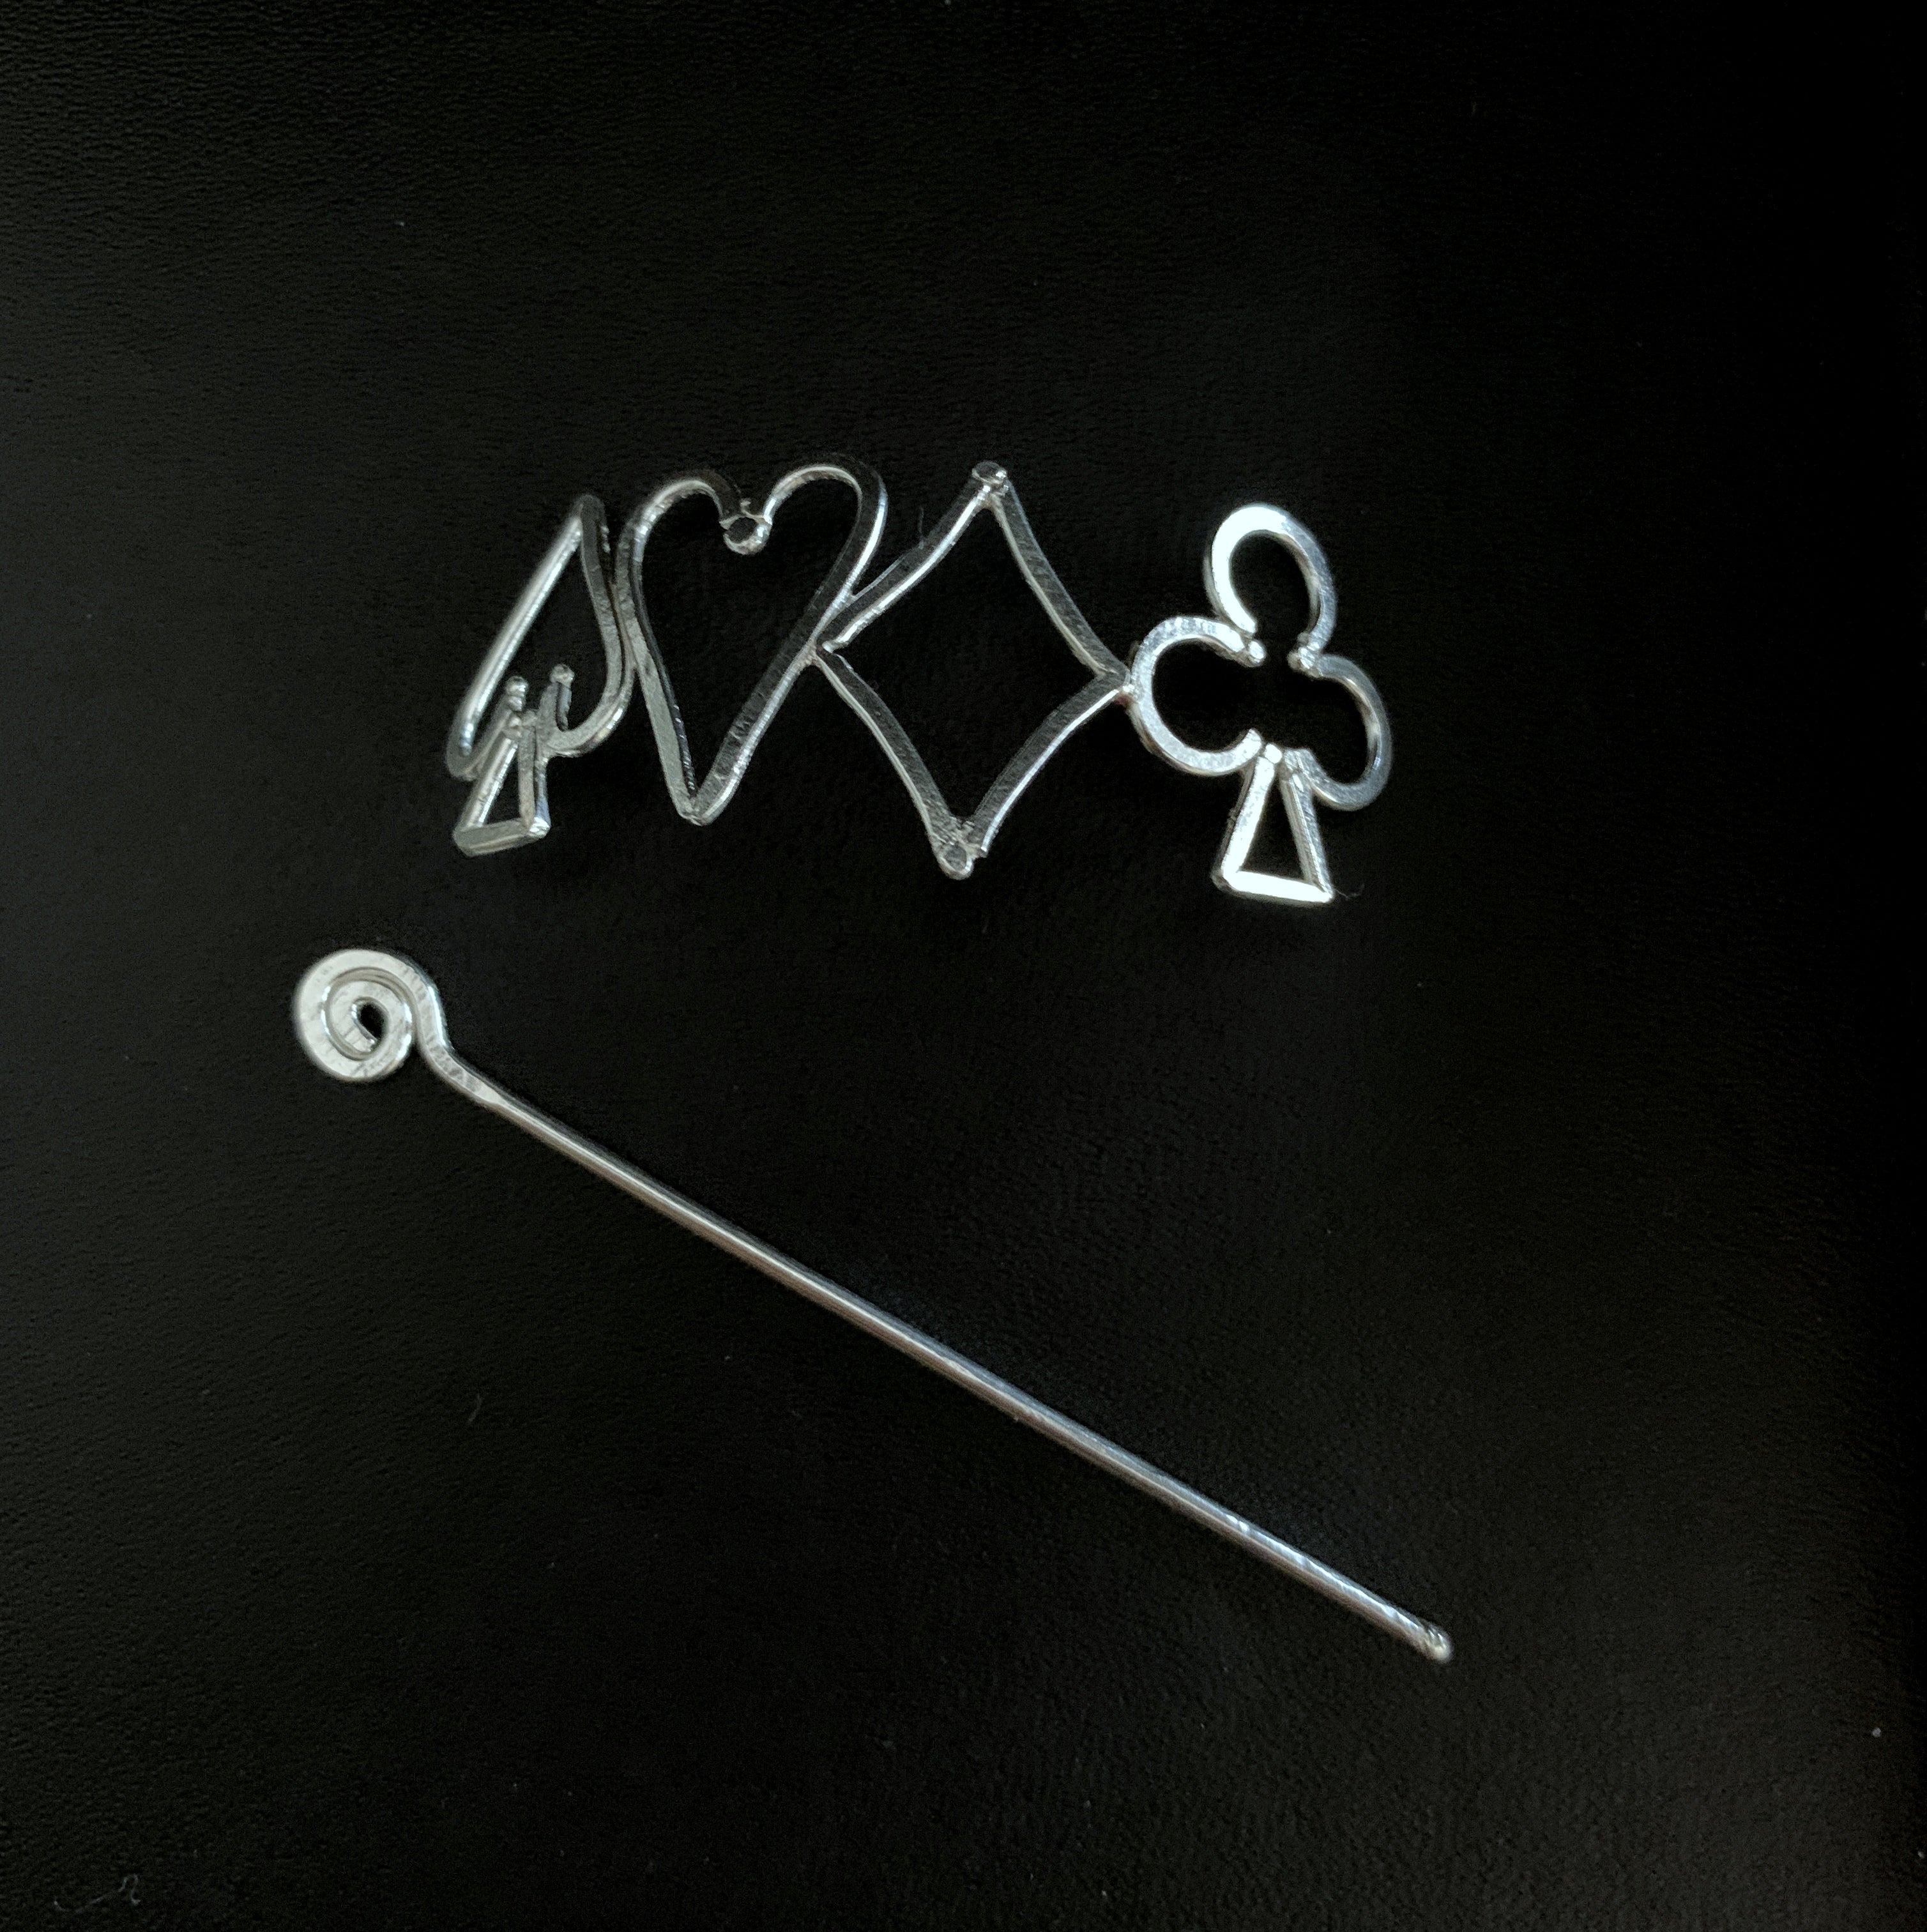 a pair of scissors and a piece of wire on a black surface